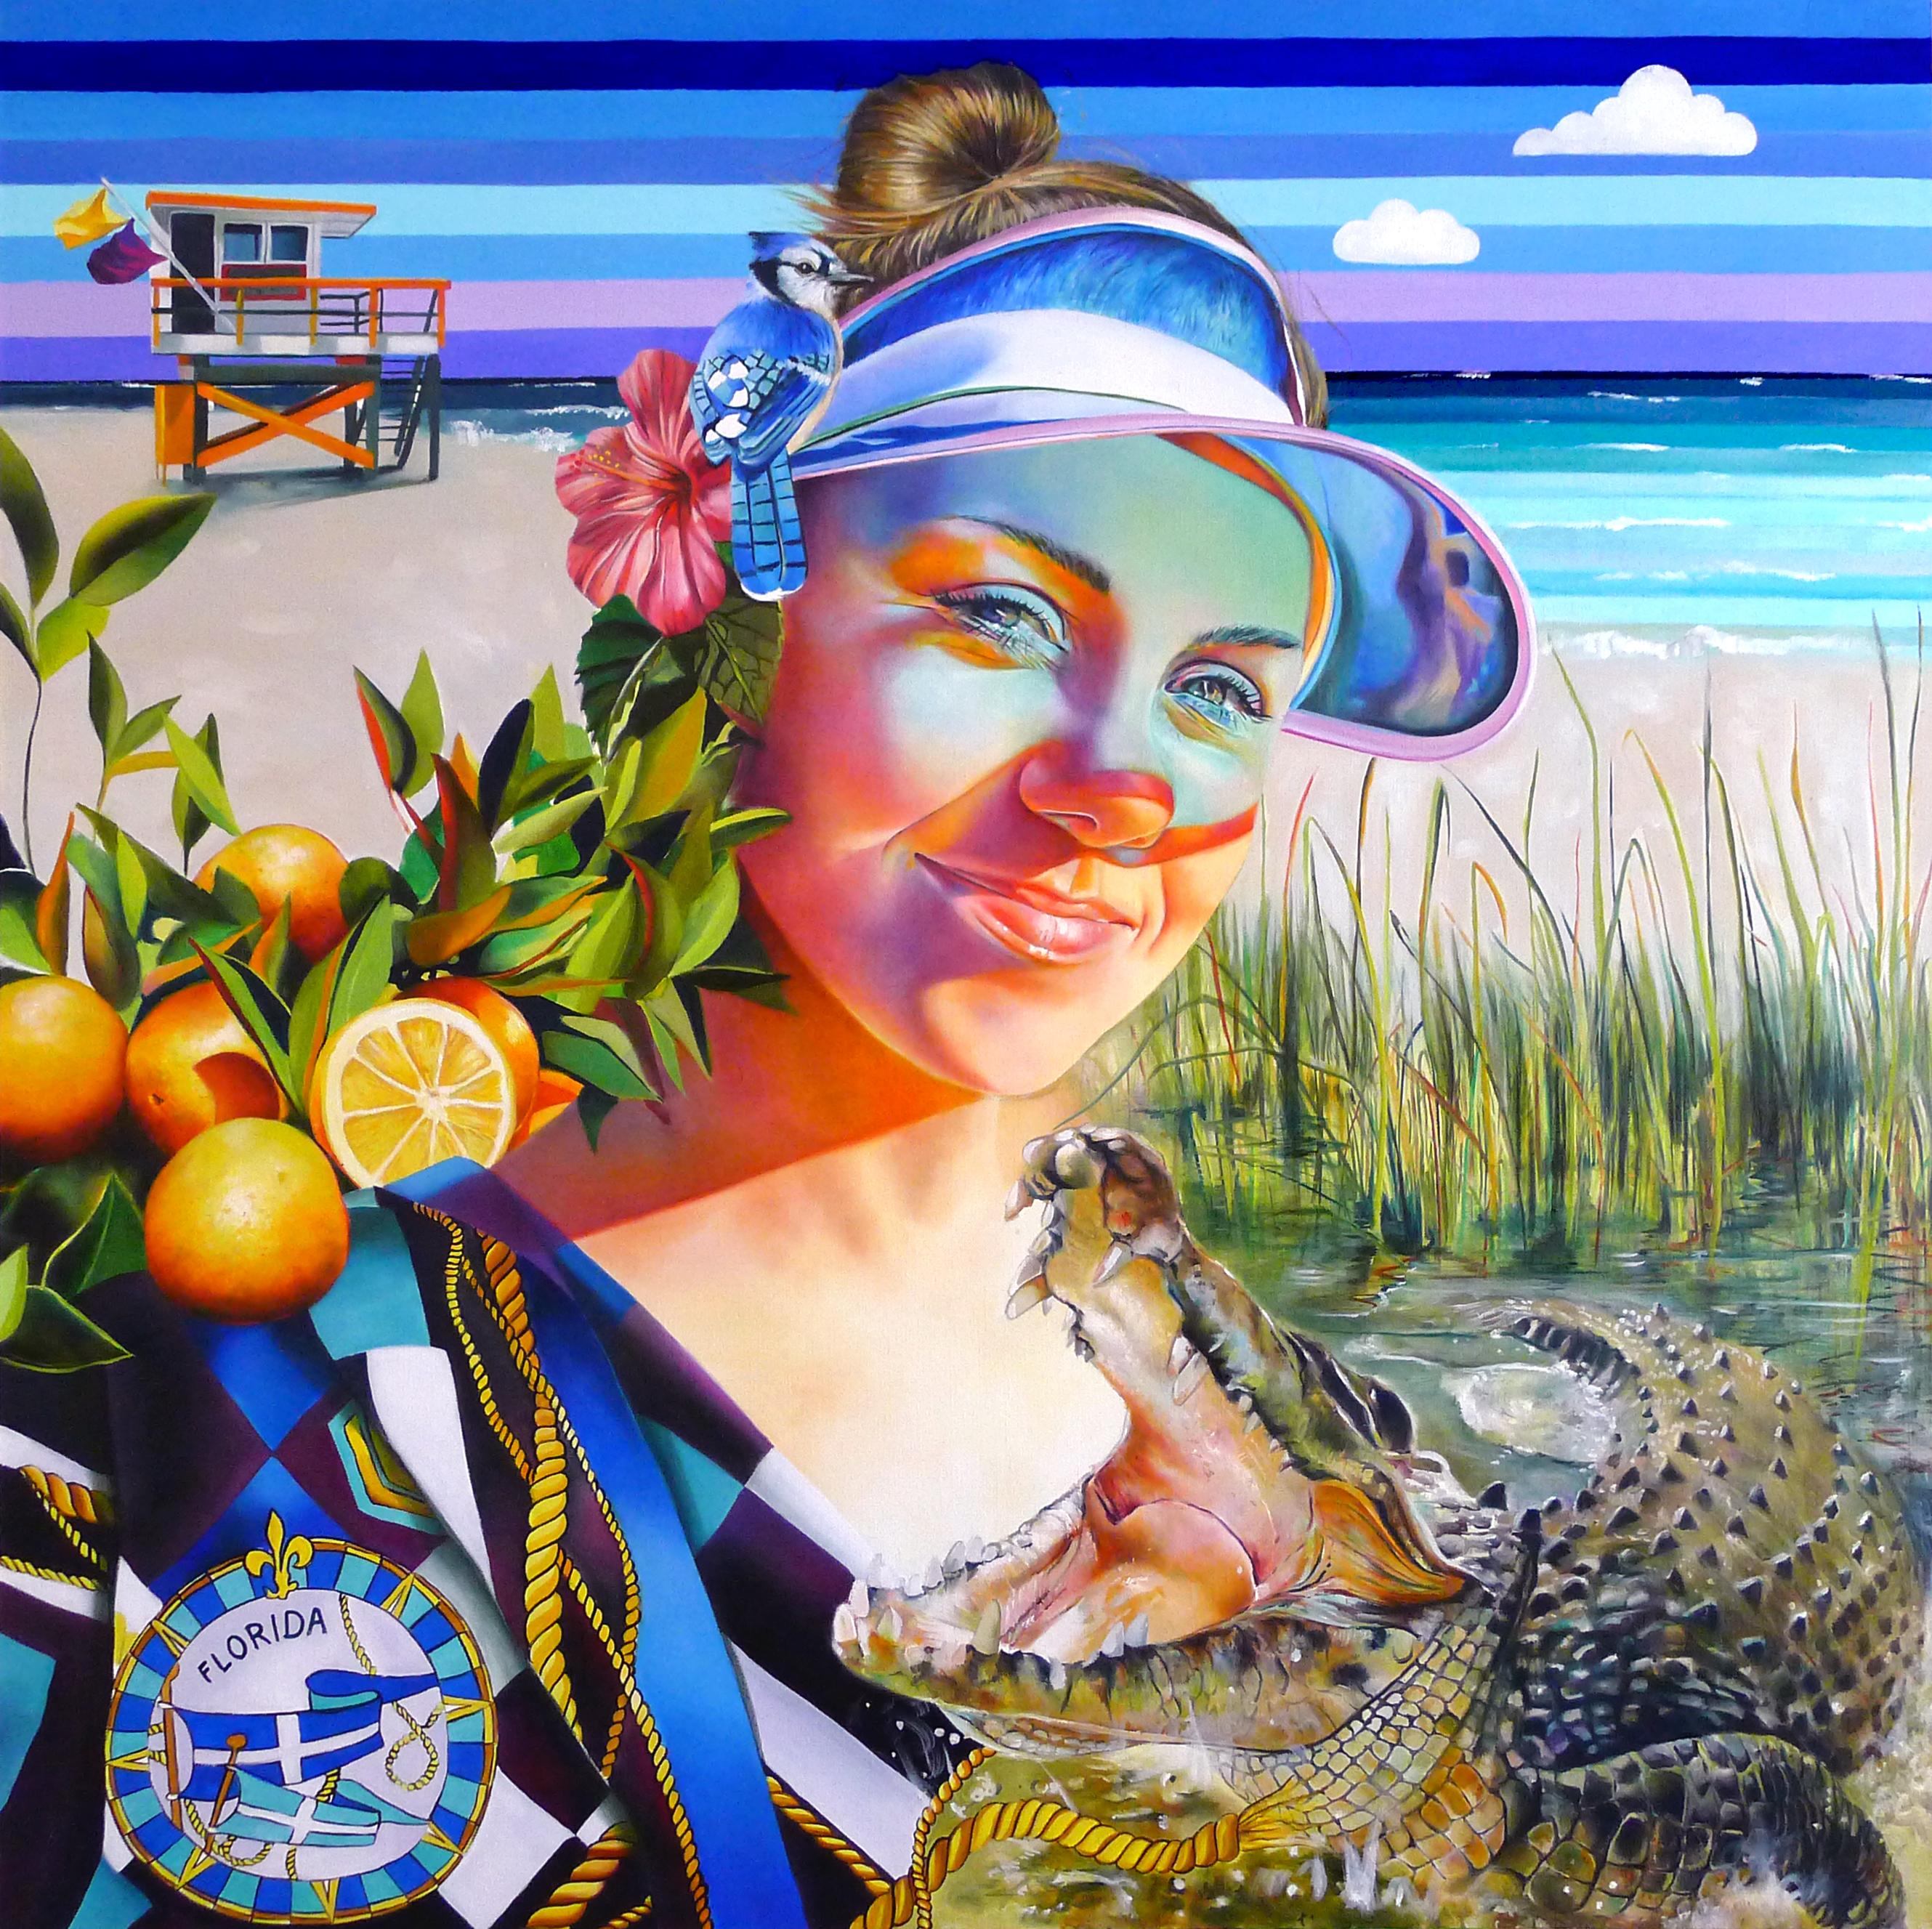 FLORIDA - figurative painting of woman with alligator, beach and oranges